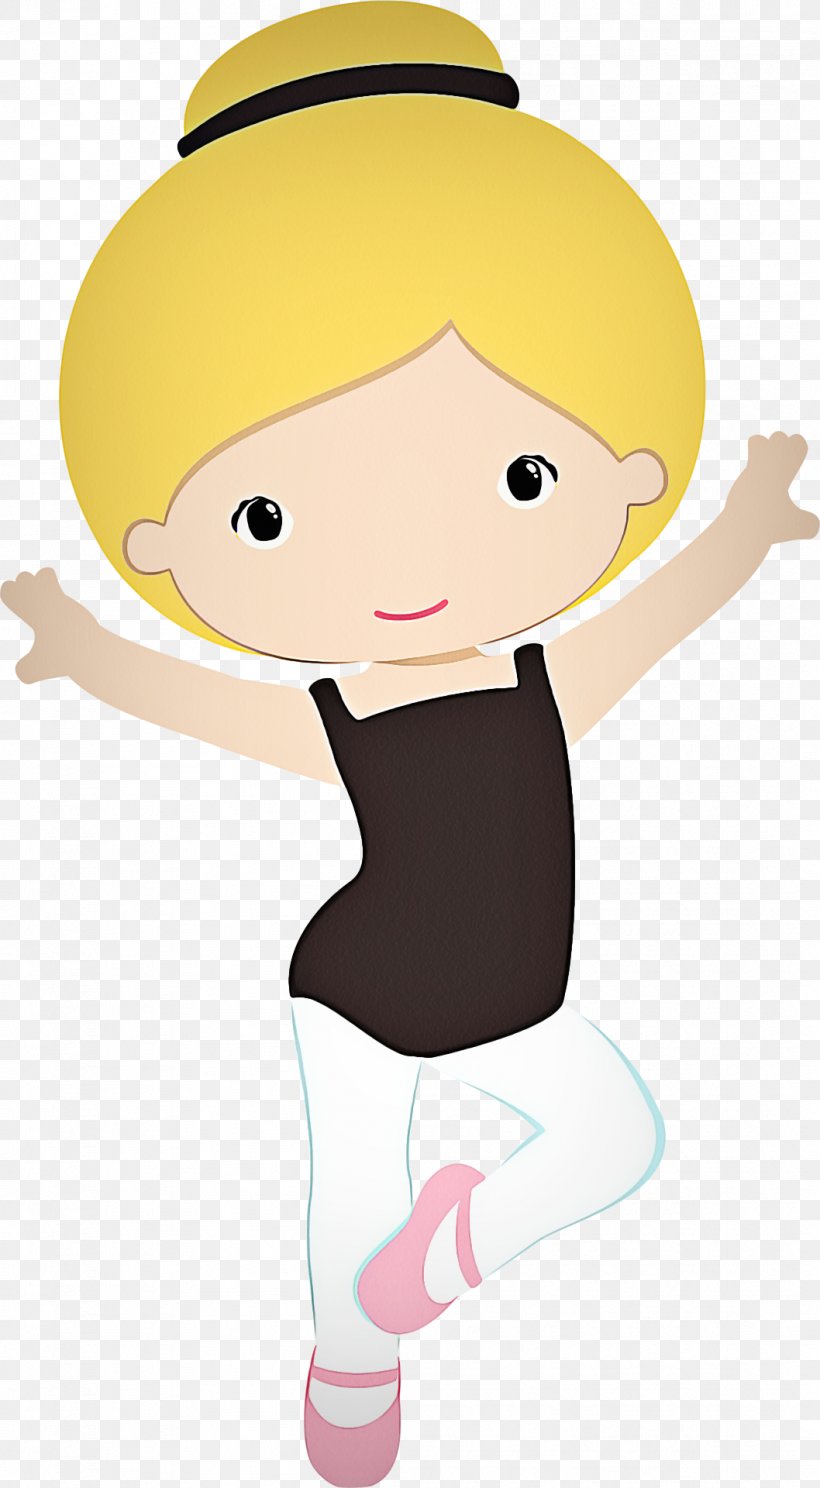 Cartoon Clip Art Style, PNG, 1058x1920px, Cartoon, Style Download Free